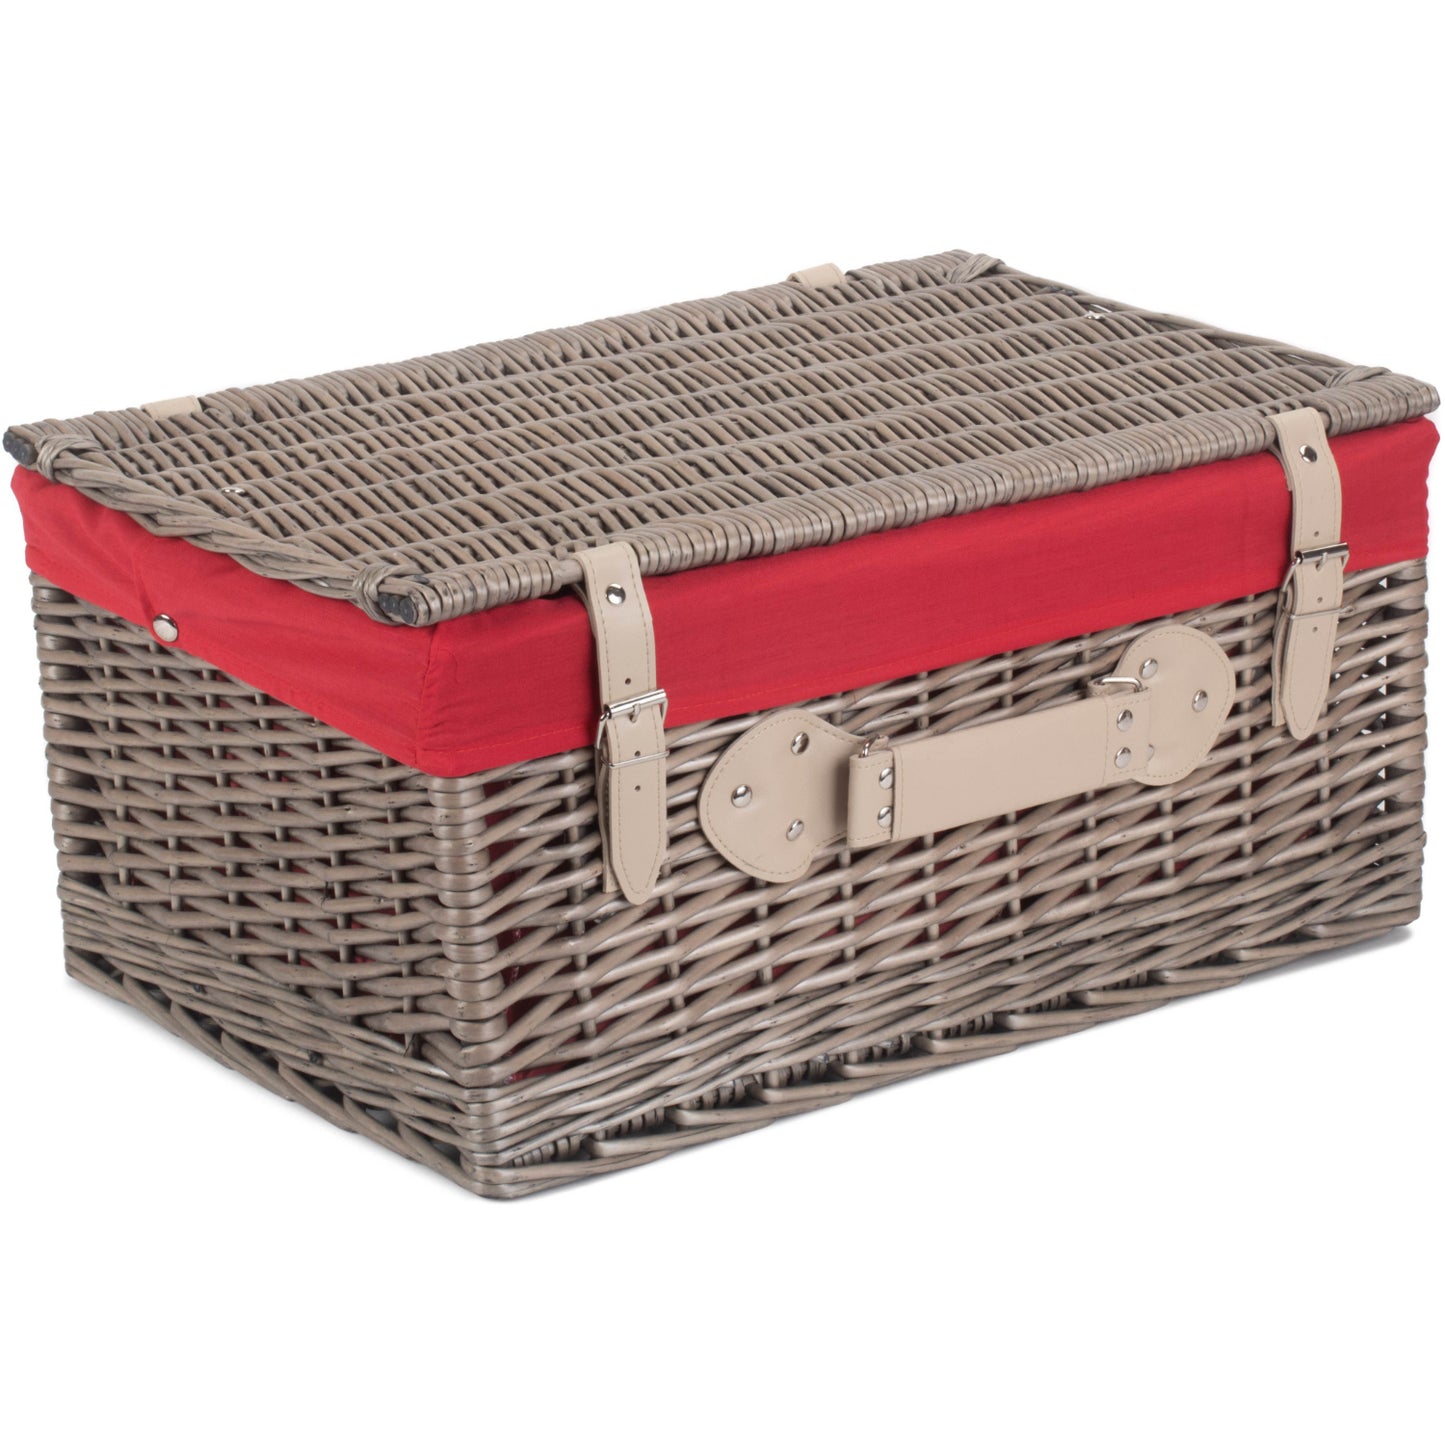 20 Inch Antique Wash Hamper With Red Lining